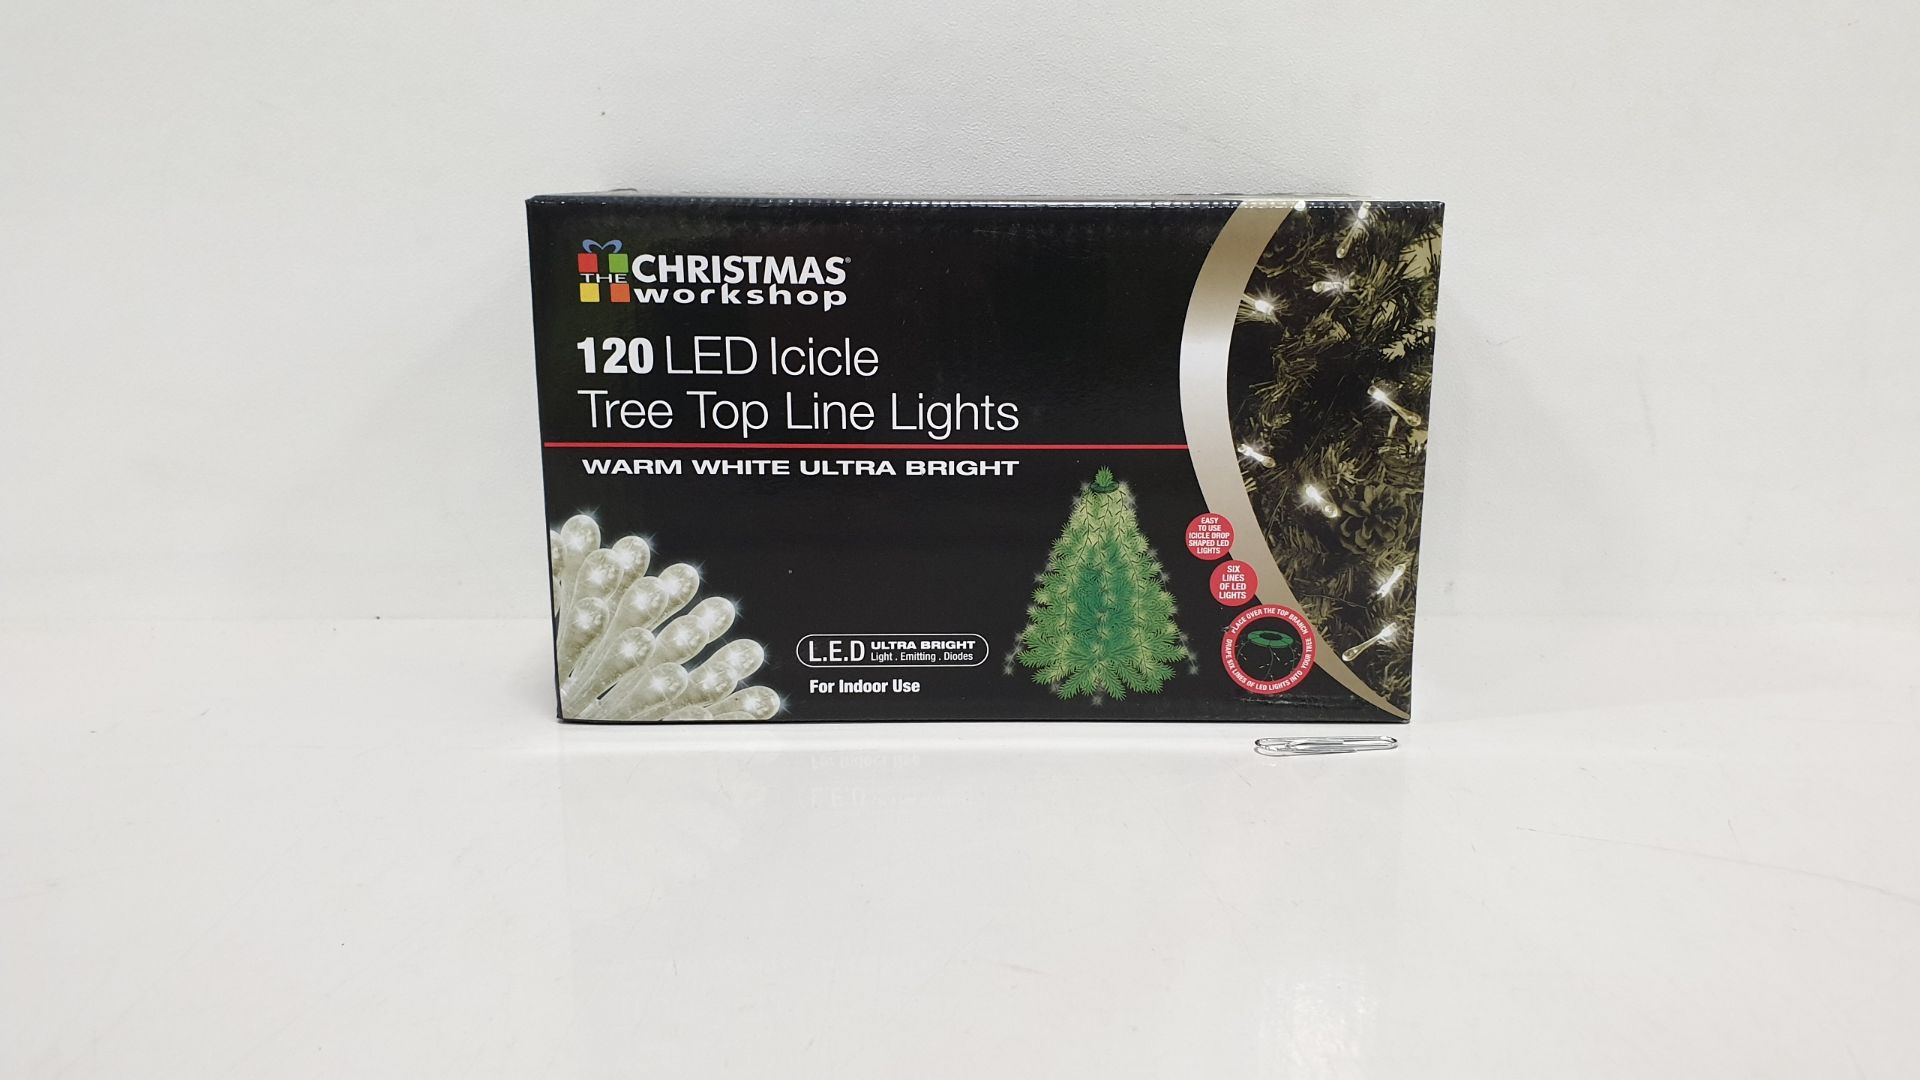 24 X BRAND NEW CHRISTMAS WORKSHOP 120 LED ICICLE TREE TOP LINE LIGHTS - IN 2 CARTONS